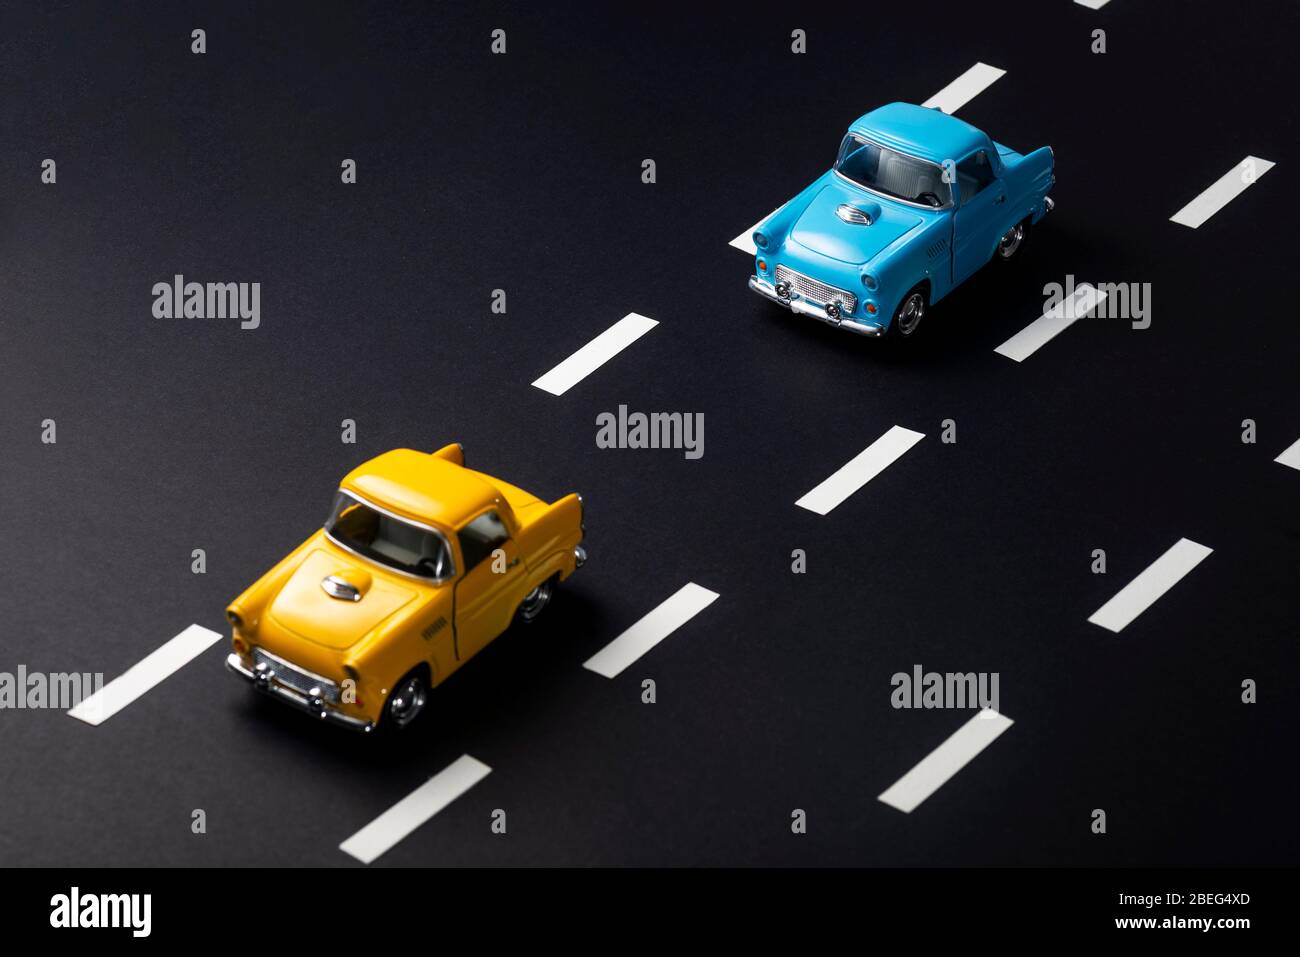 Two toy cars on the road one after another. One is blue one is yellow colored. The image tells about following distance in traffic. Stock Photo